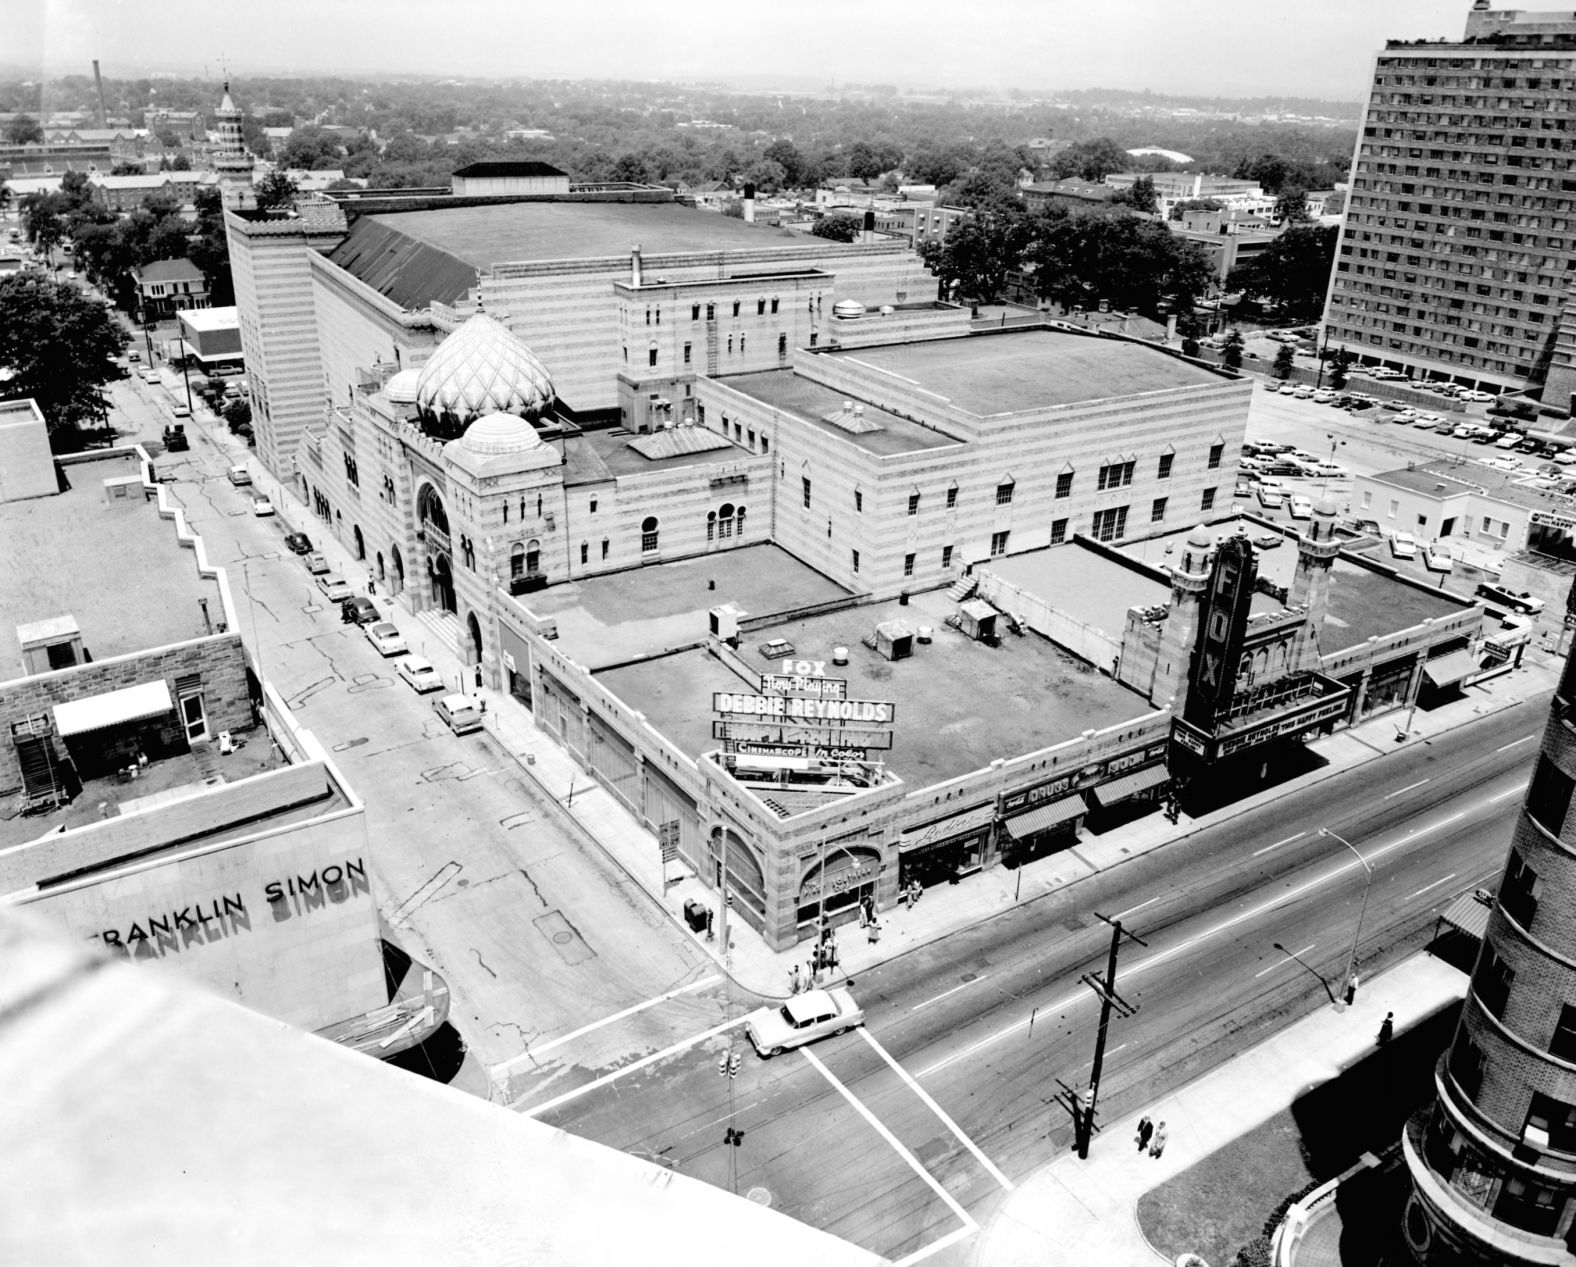 90 years after the city of Atlanta received the theatre as a Christmas gift, the Fox is one of the last-standing atmospheric theatres in the world. This is an aerial view of Atlanta in the late 1950's, when the film "This Happy Feeling" starring Debbie Reynolds was being featured at The Fox.